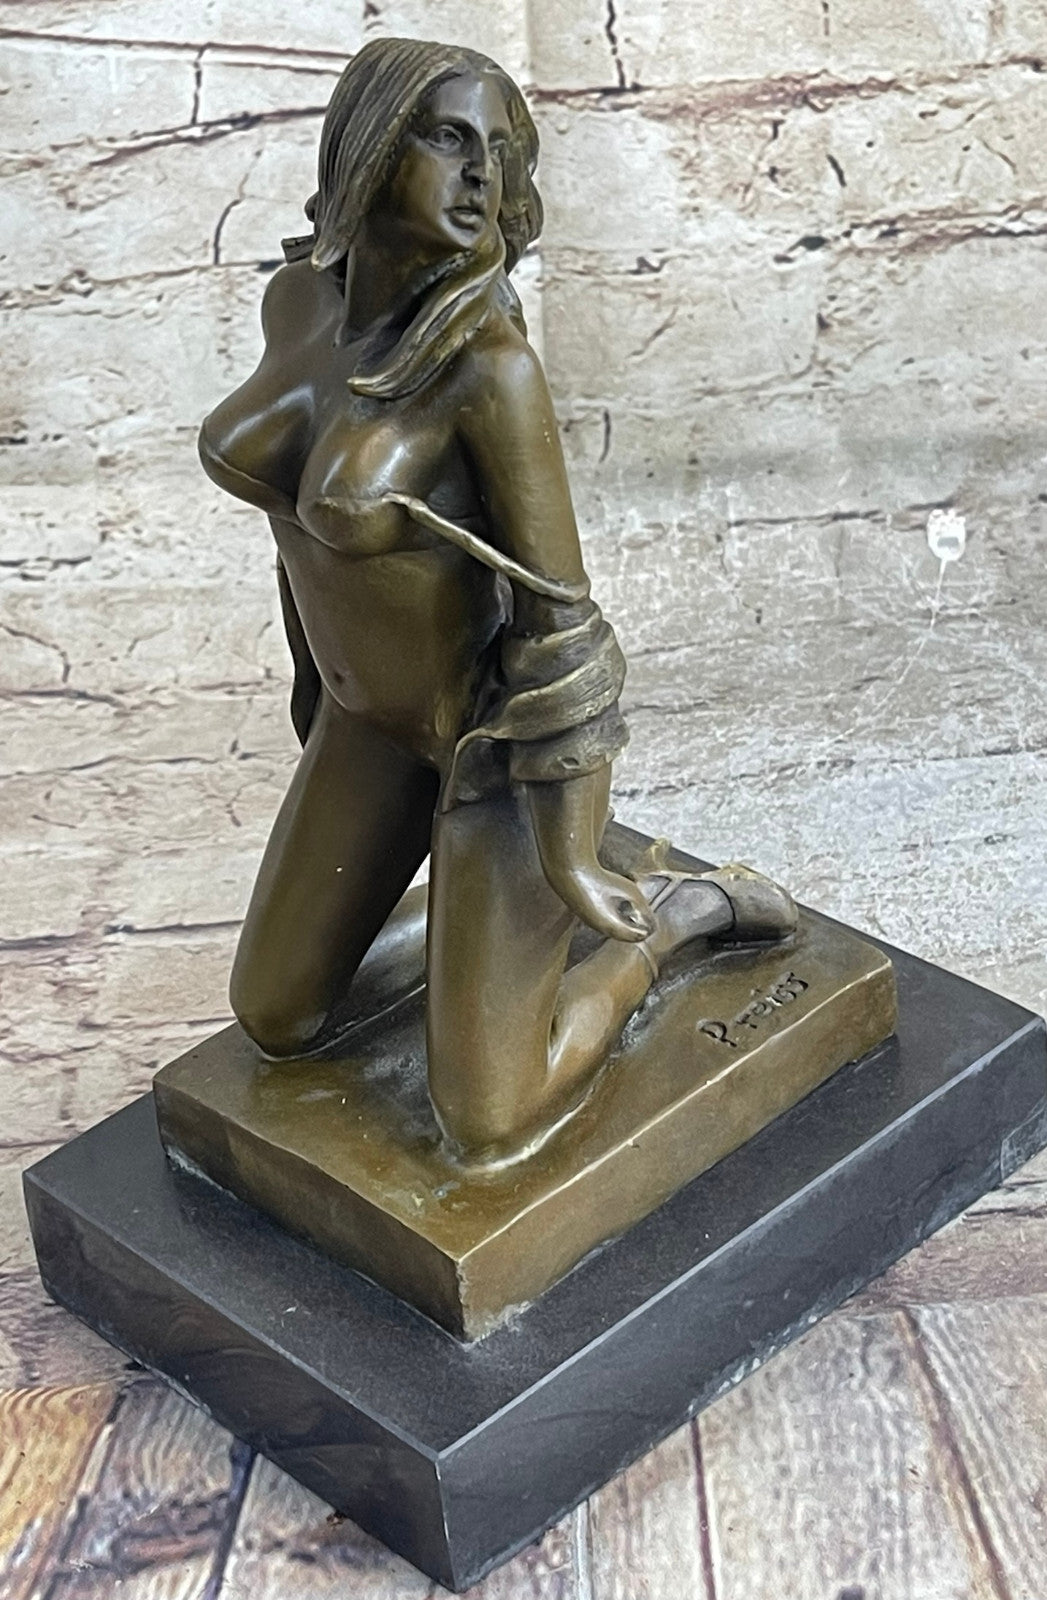 Bronze Sculpture Erotic Art Titled Girl with Whip By German Artist Preiss Statue